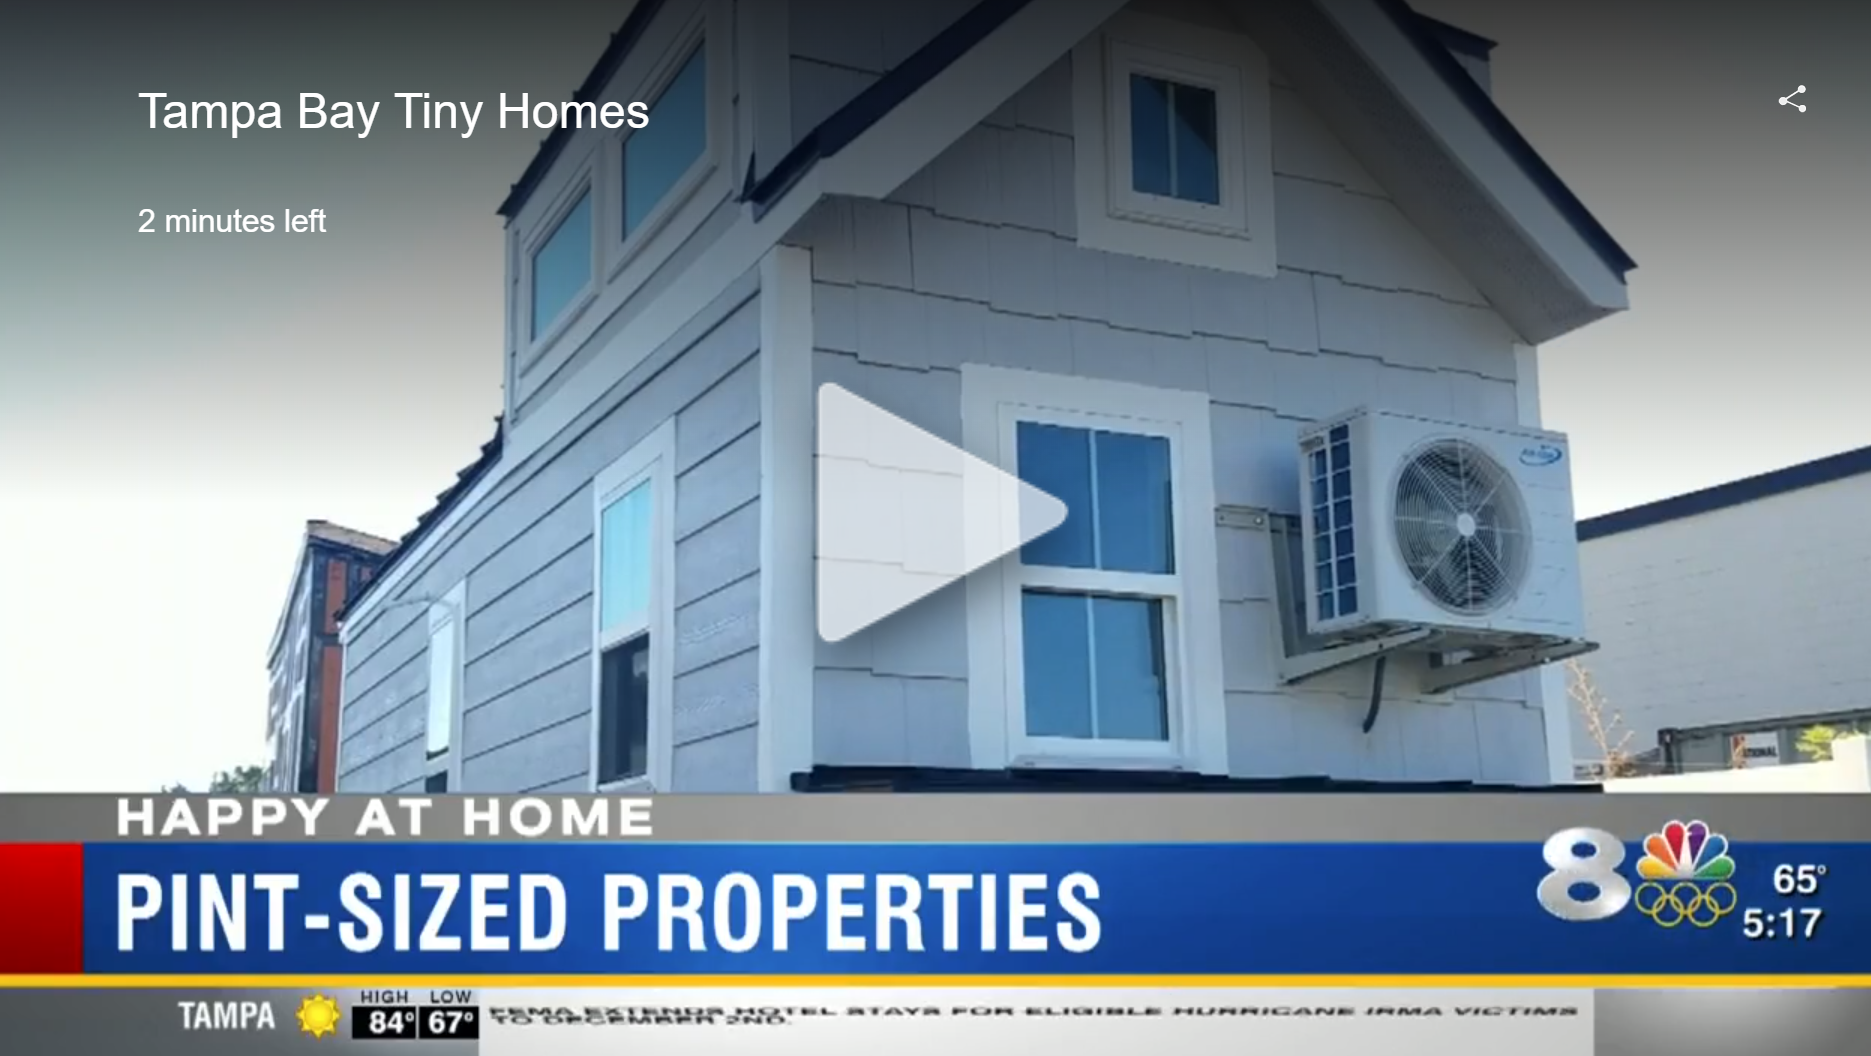 Big demand for tiny homes in Tampa Bay area – News Channel 8